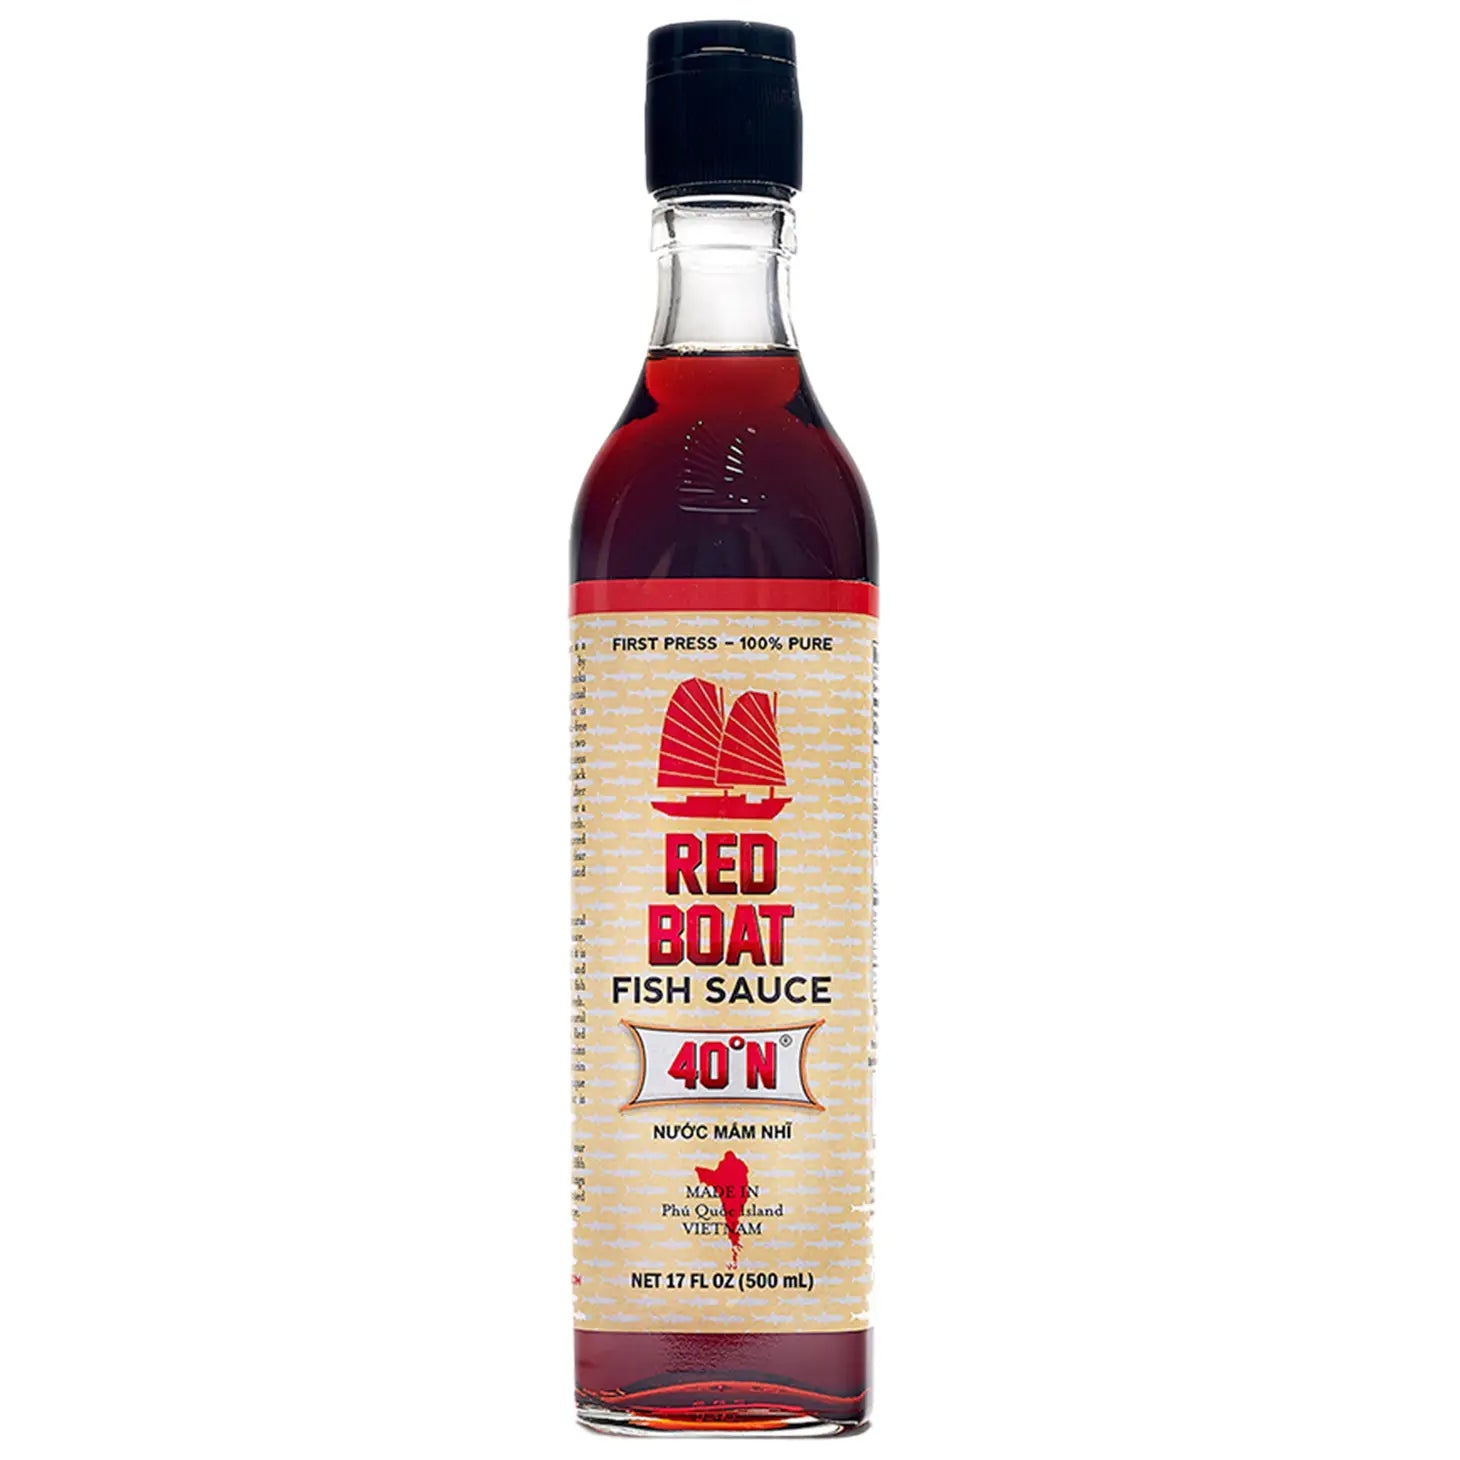 JUST IN-40°N Fish Sauce 500ml Red Boat Fish Sauce – Mamas Got Heart